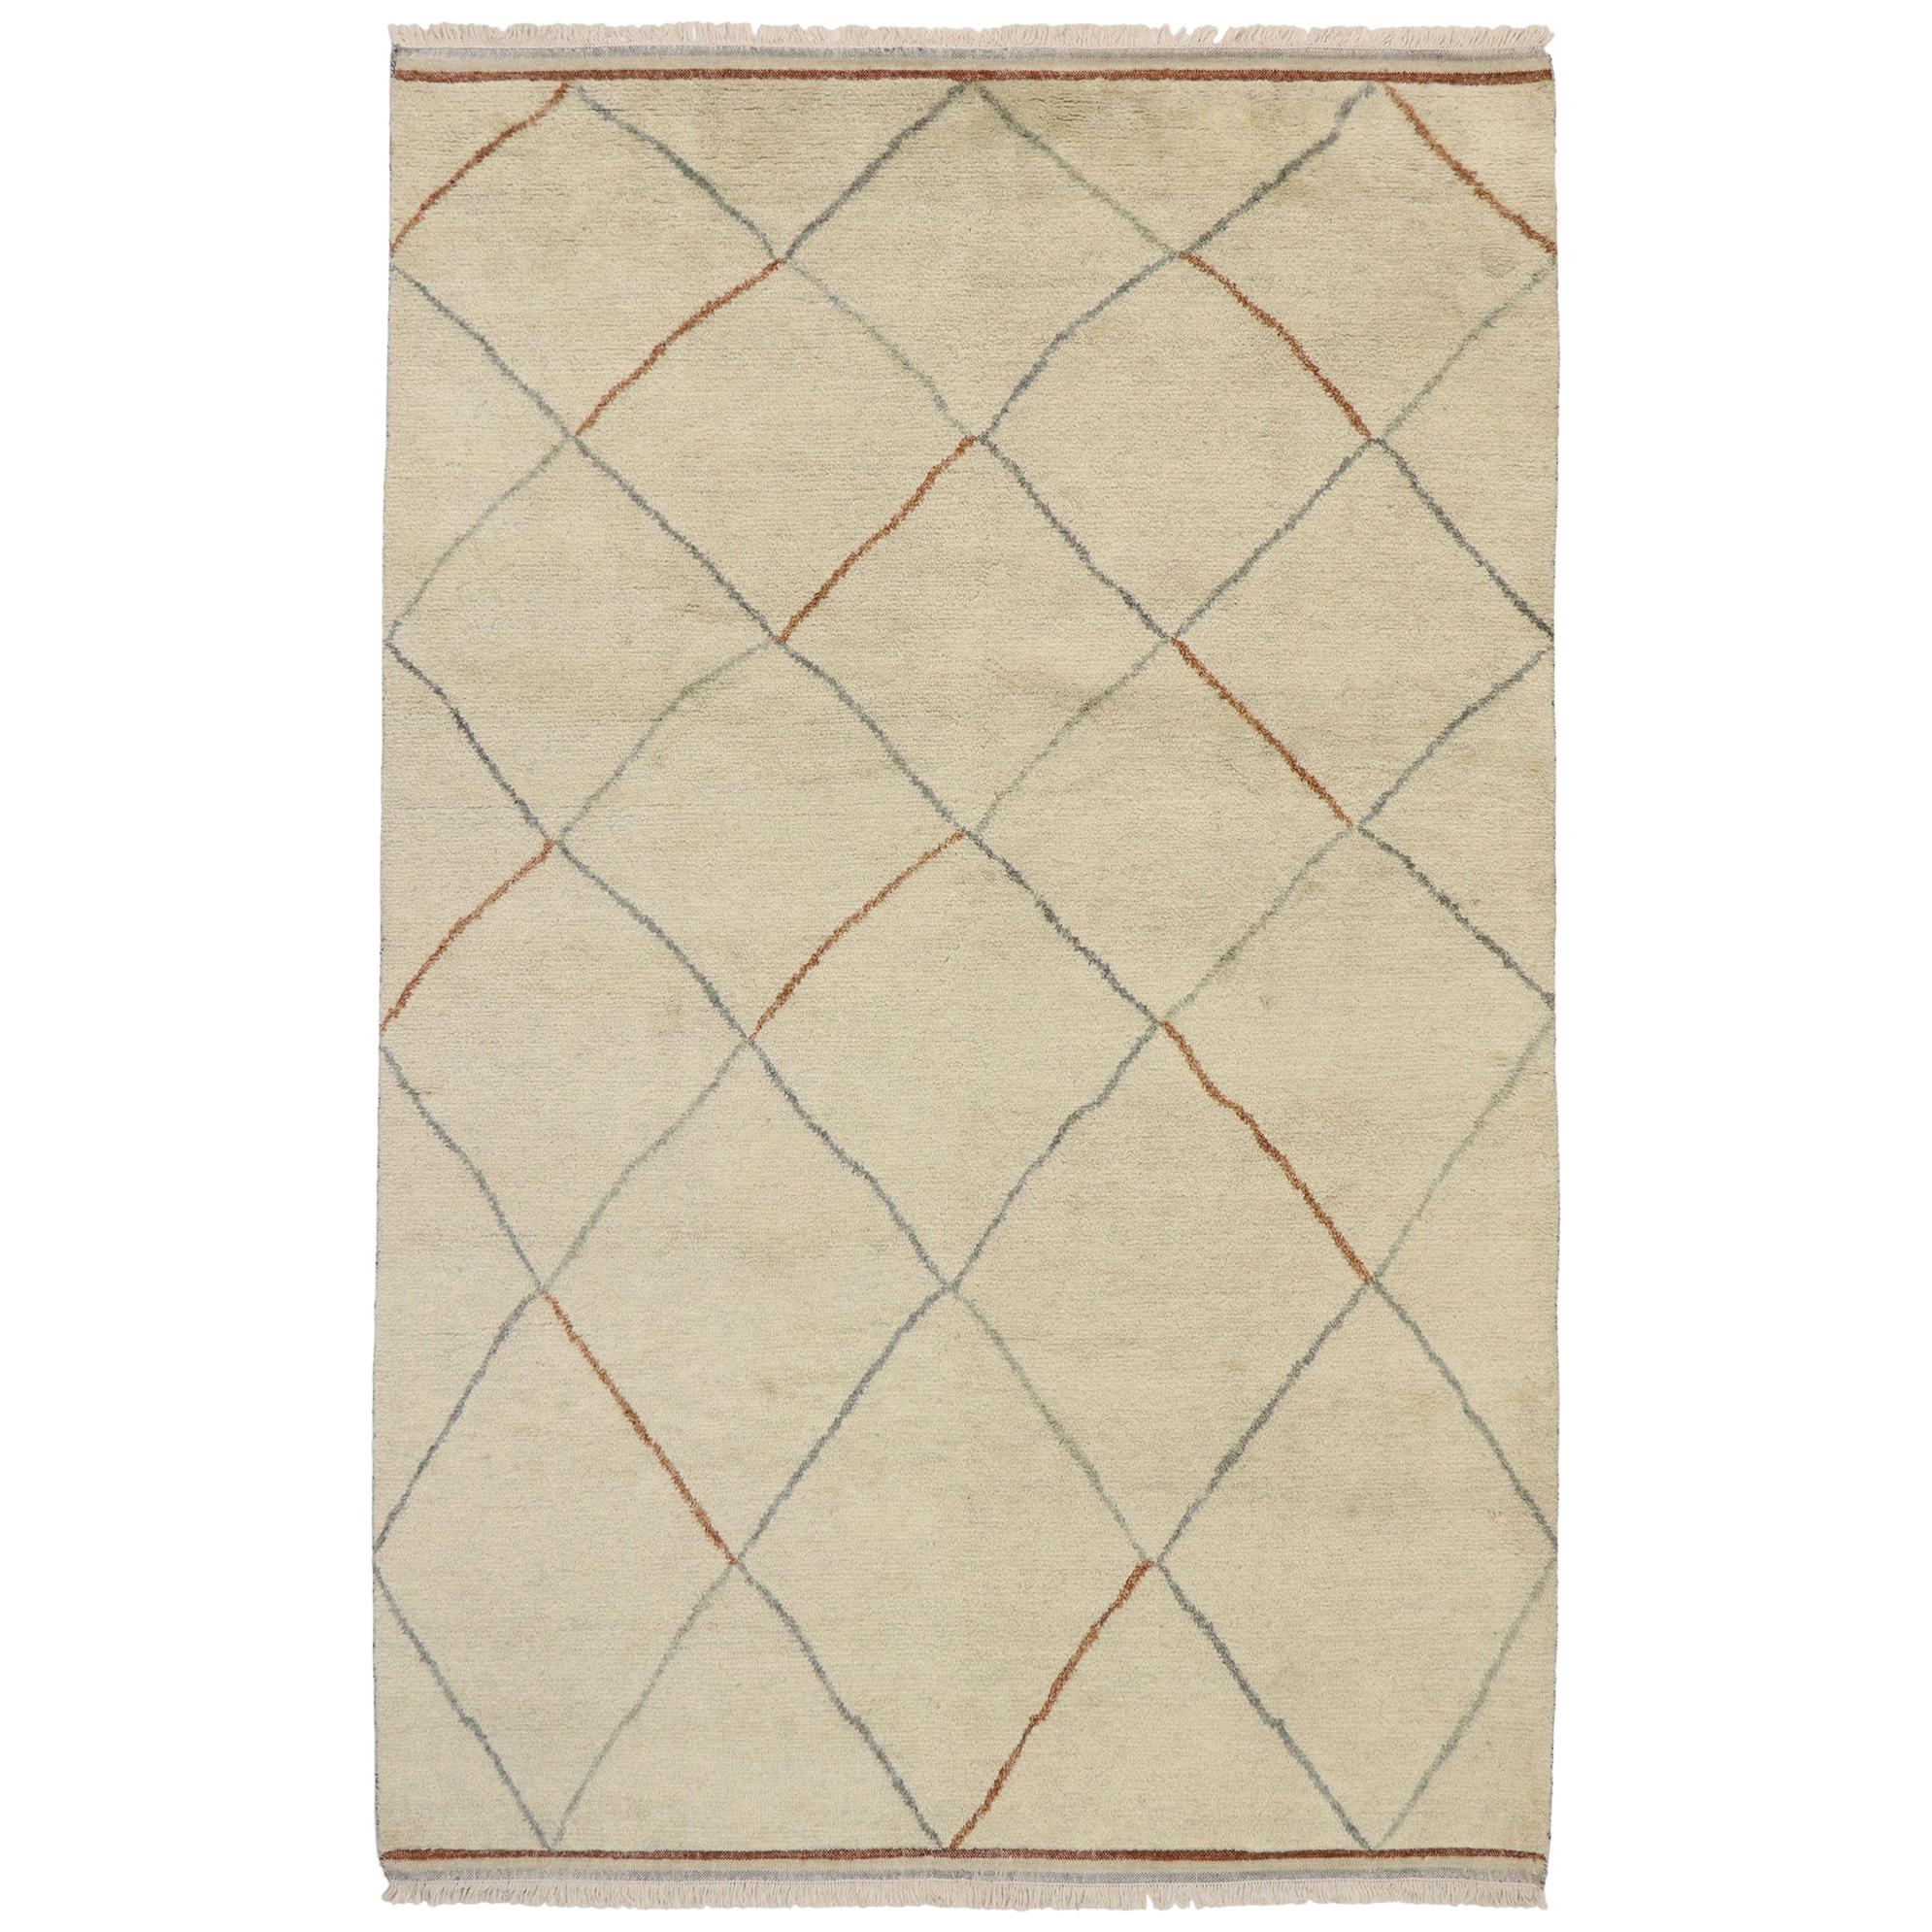 New Contemporary Moroccan Rug with Warm Minimalist Style